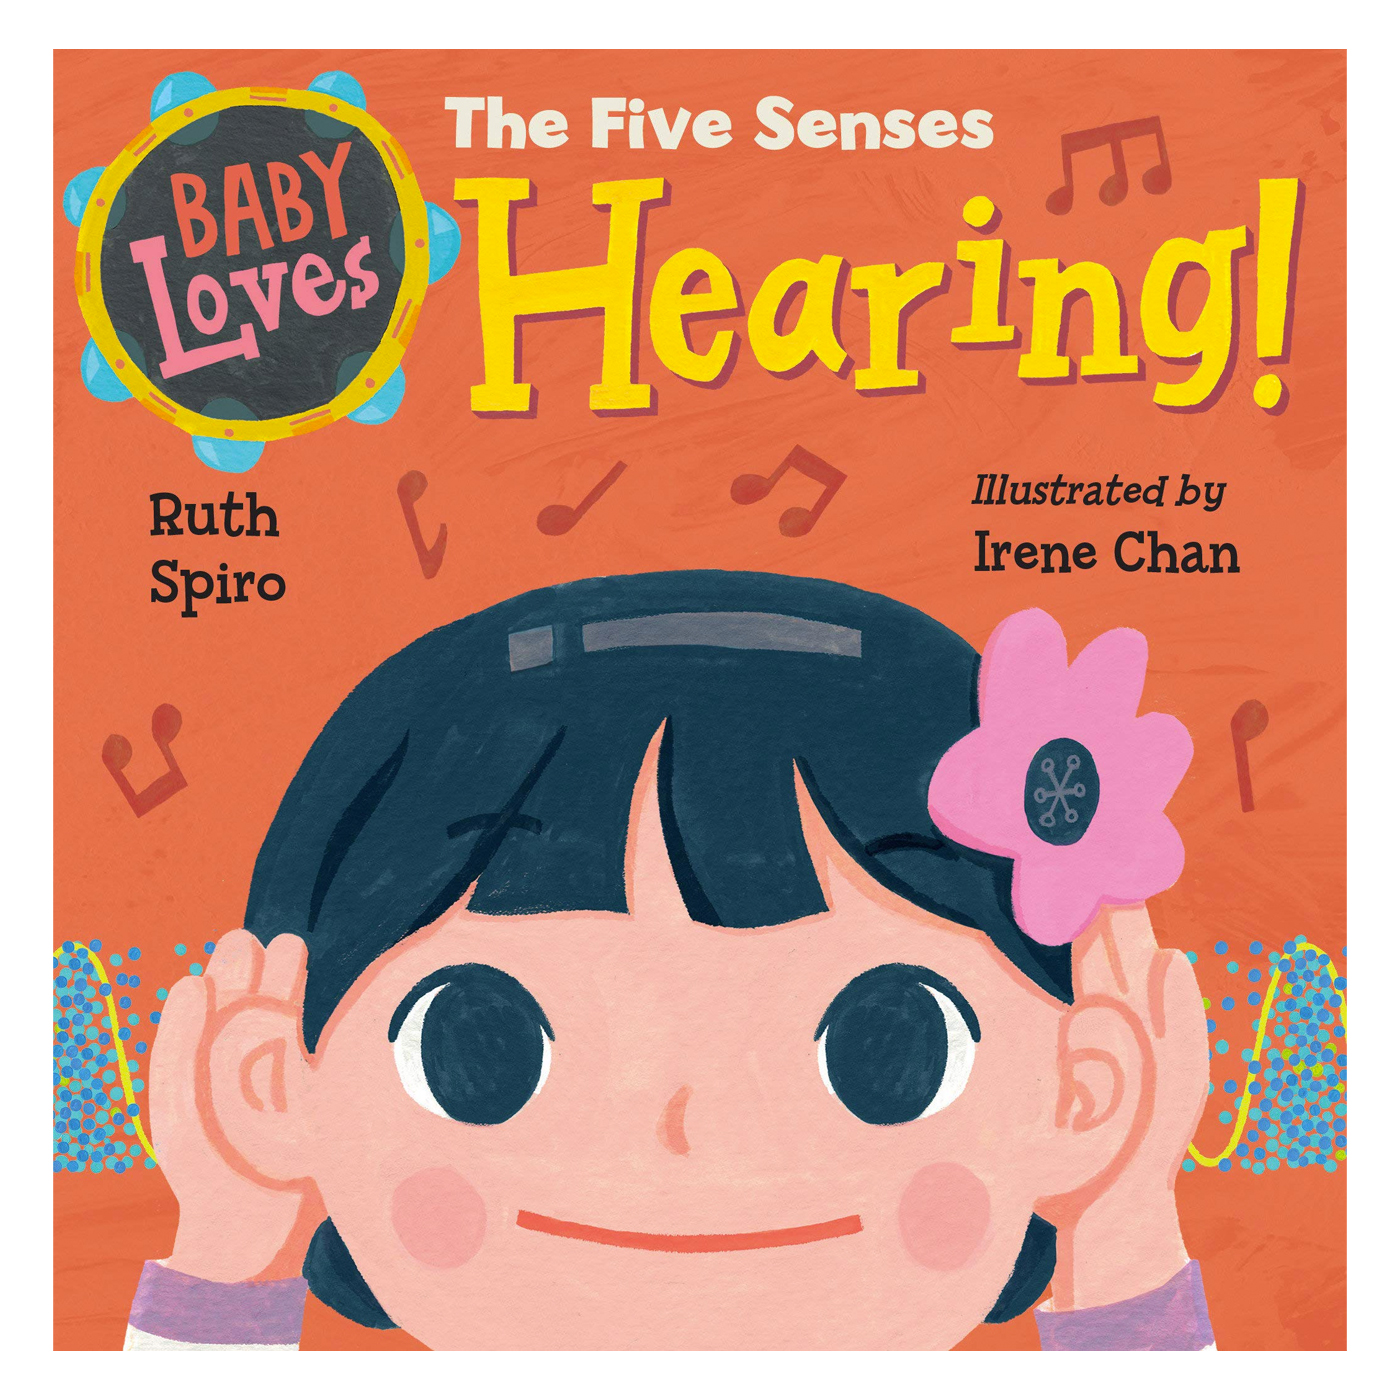  Baby Loves the Five Senses: Hearing!